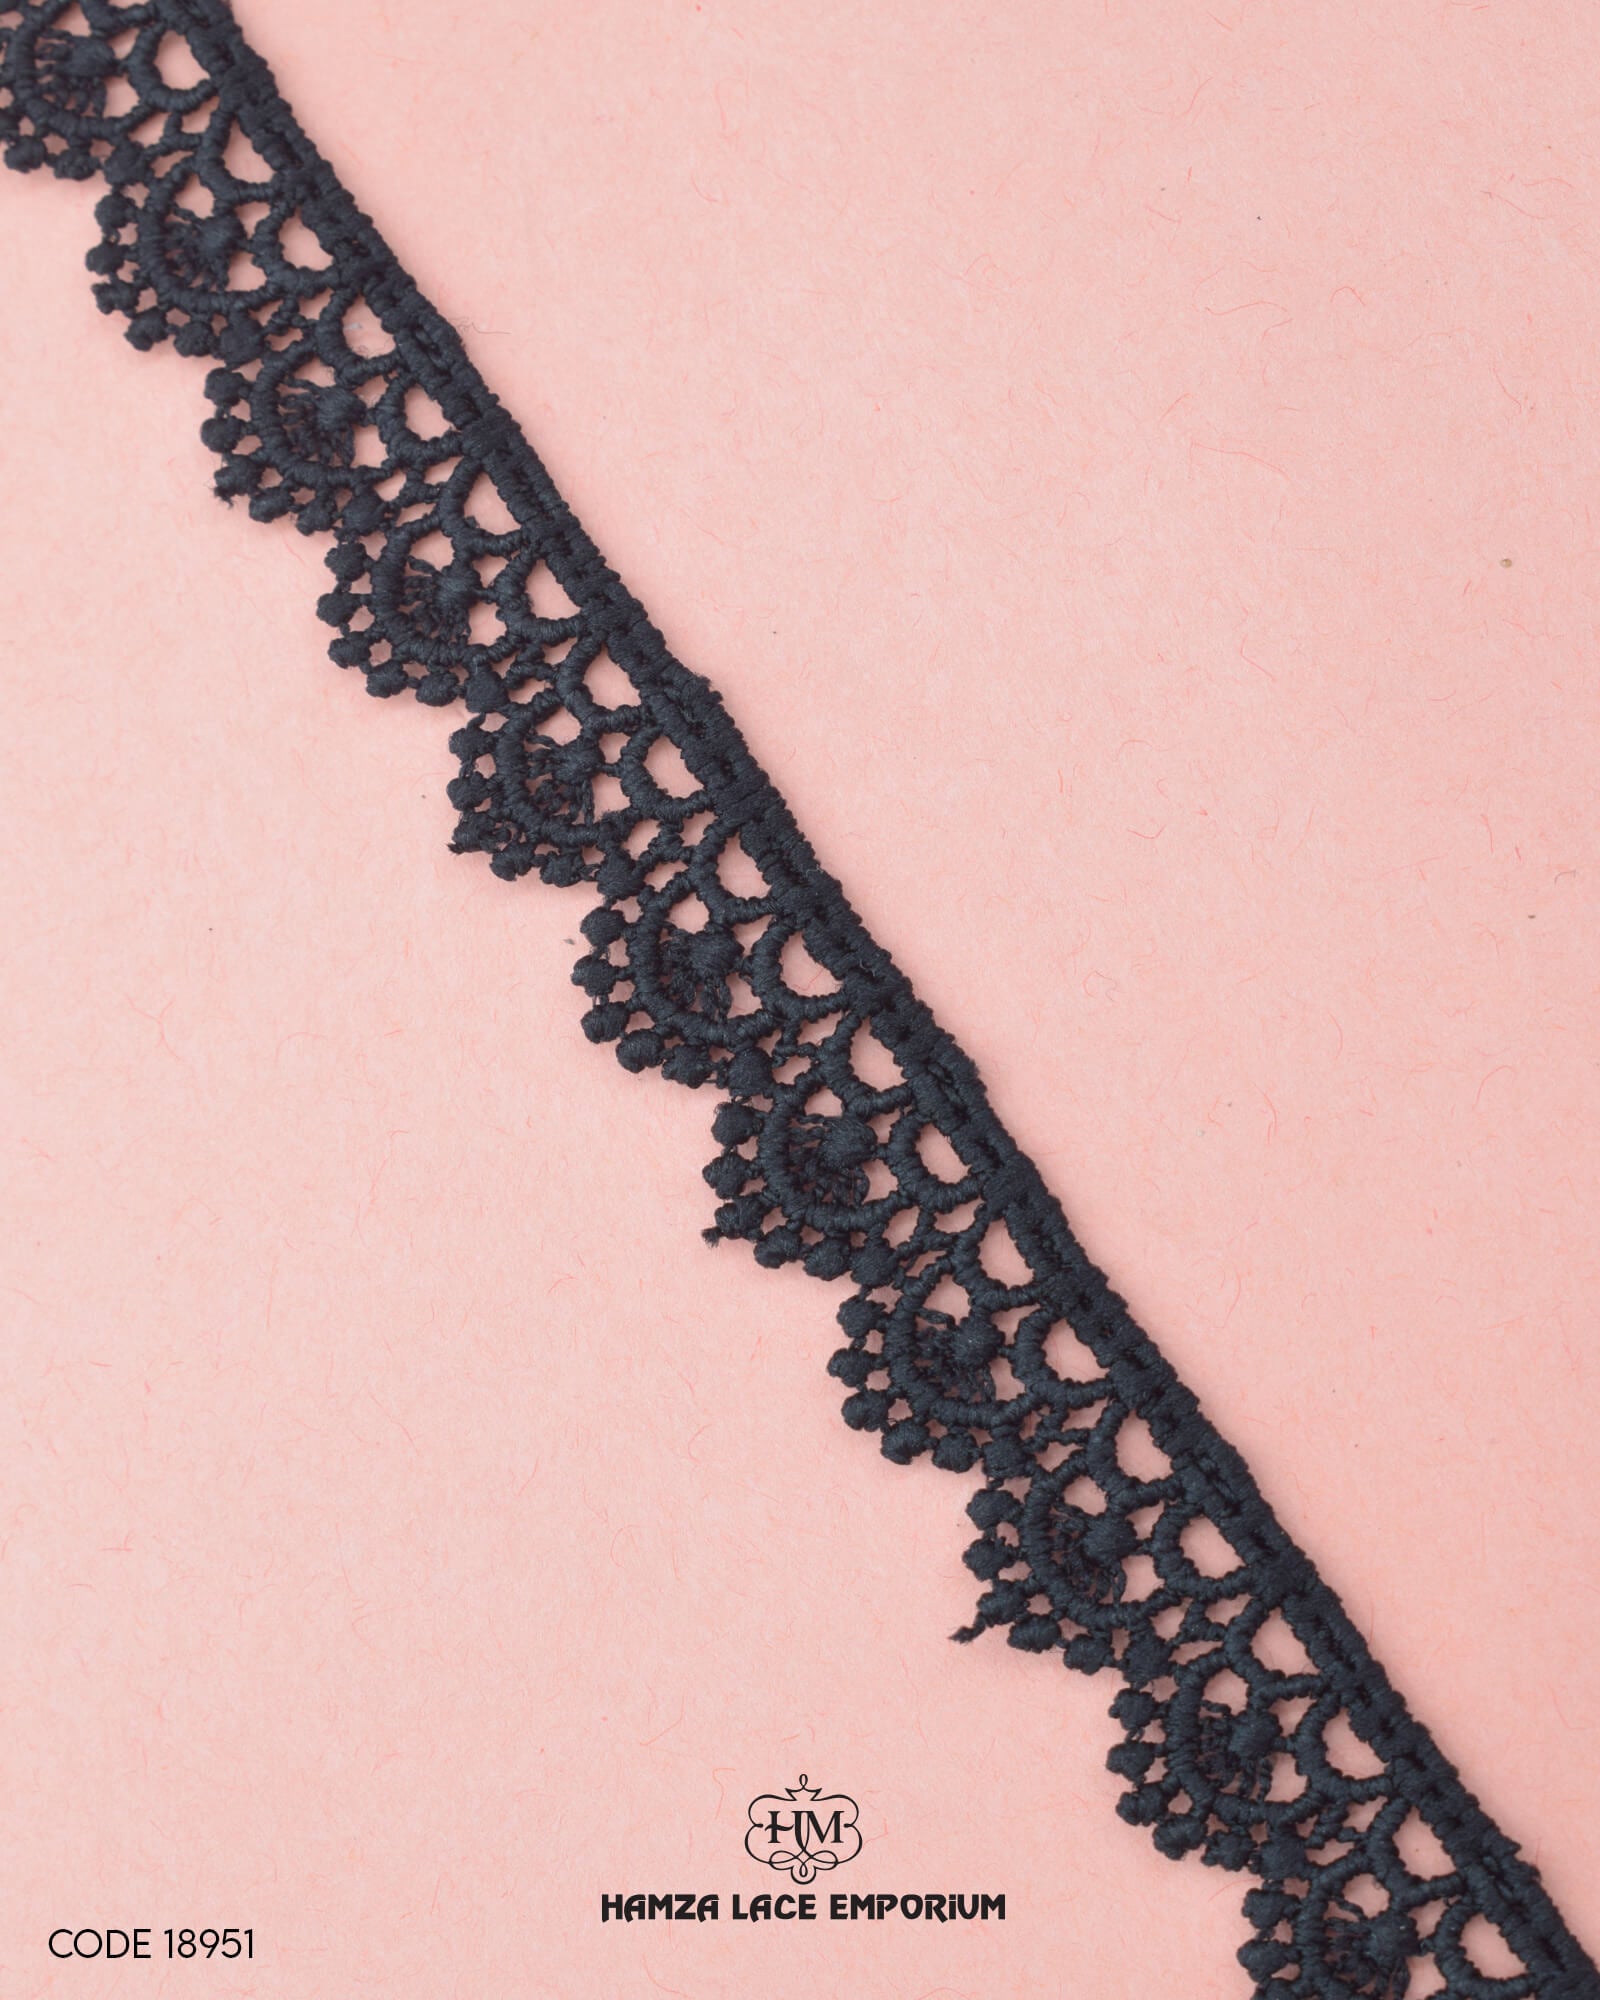 'Edging Scallop Lace 18951' with the 'Hamza Lace' sign at the bottom